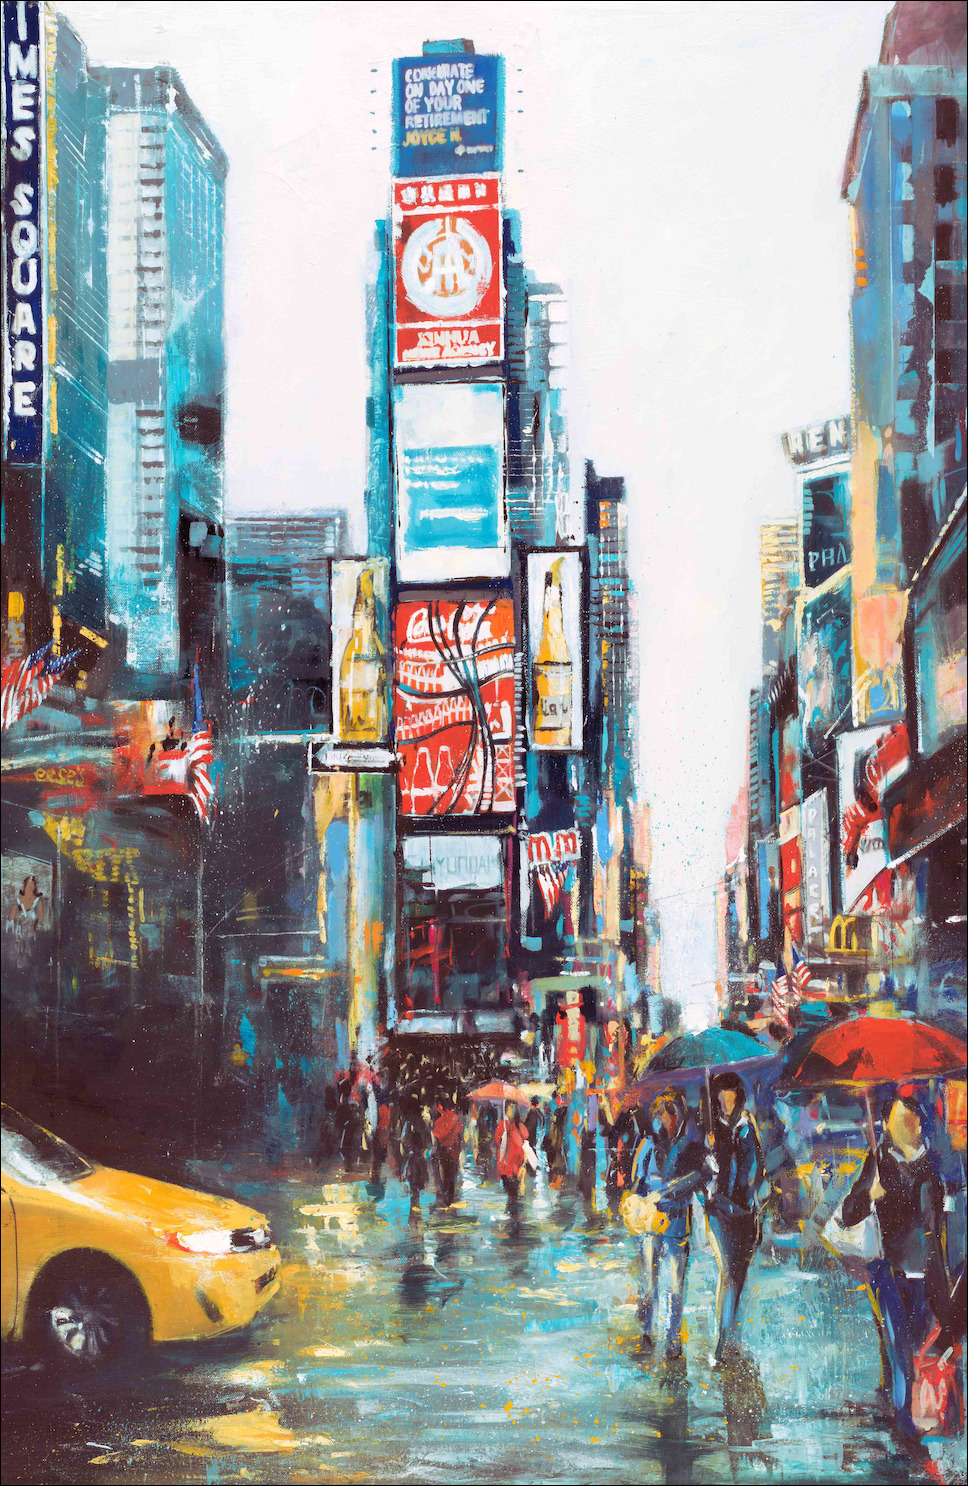 New York Cityscape "Rainy Day in Time Square" Reduced Vertical Variant From Judith Dalozzo Artwork